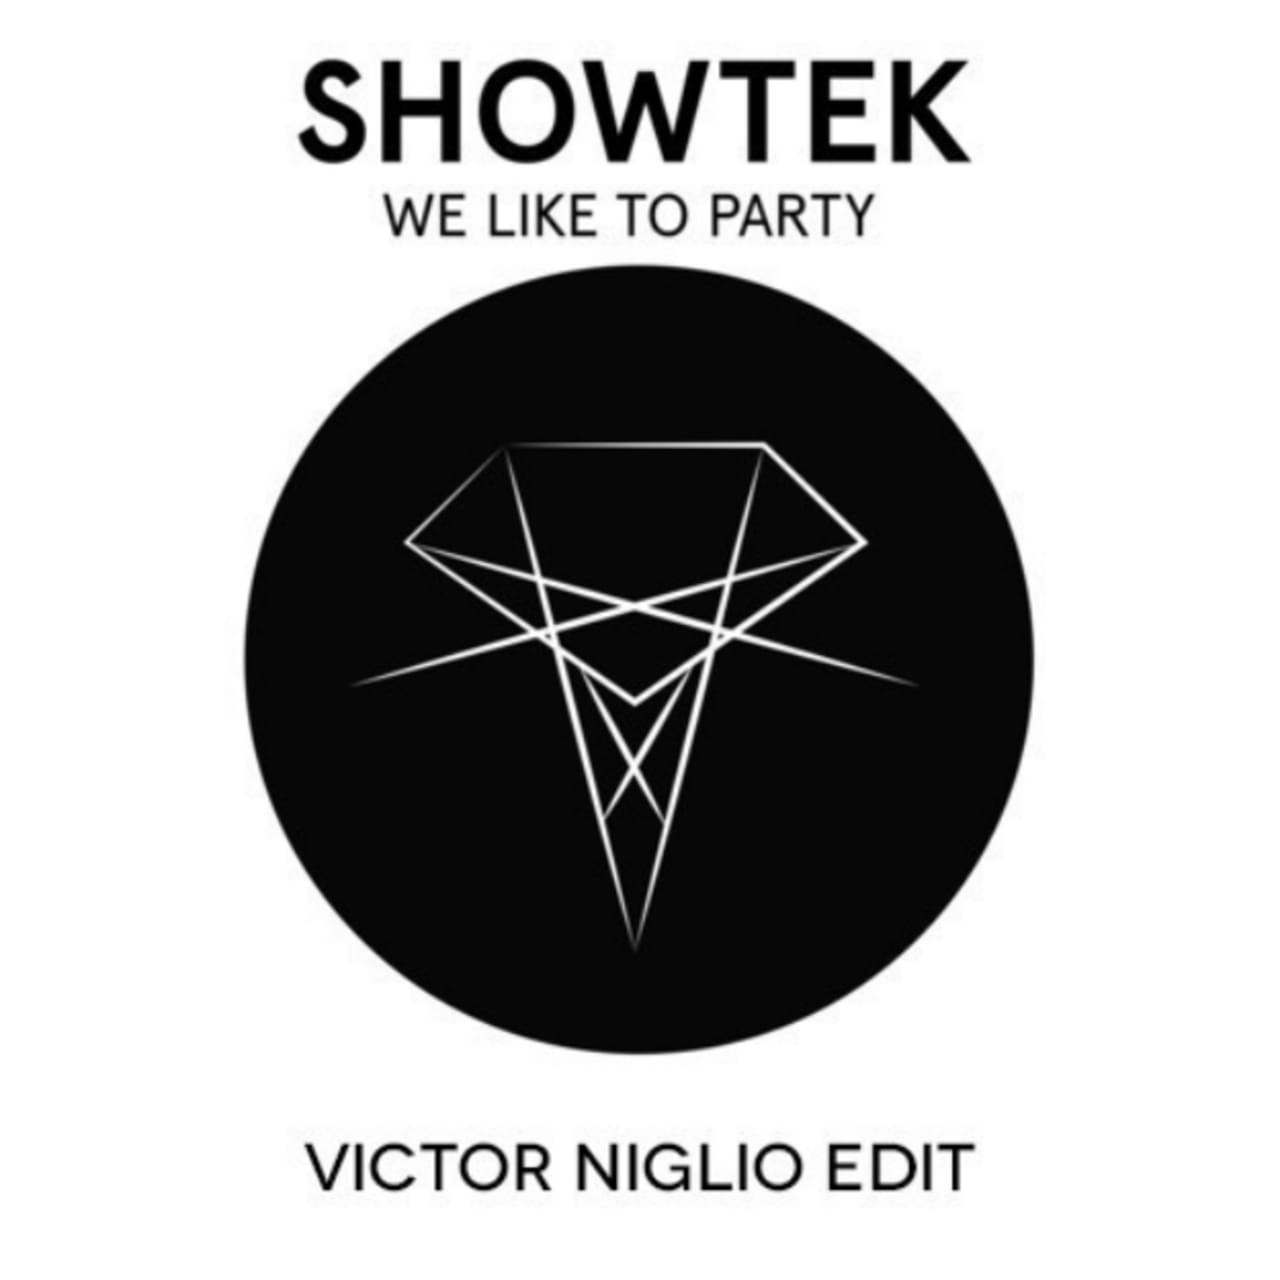 Showtek We Like To Party Victor Niglio Edit Complex Skachay showtek we like to party i showtek we like to party. complex